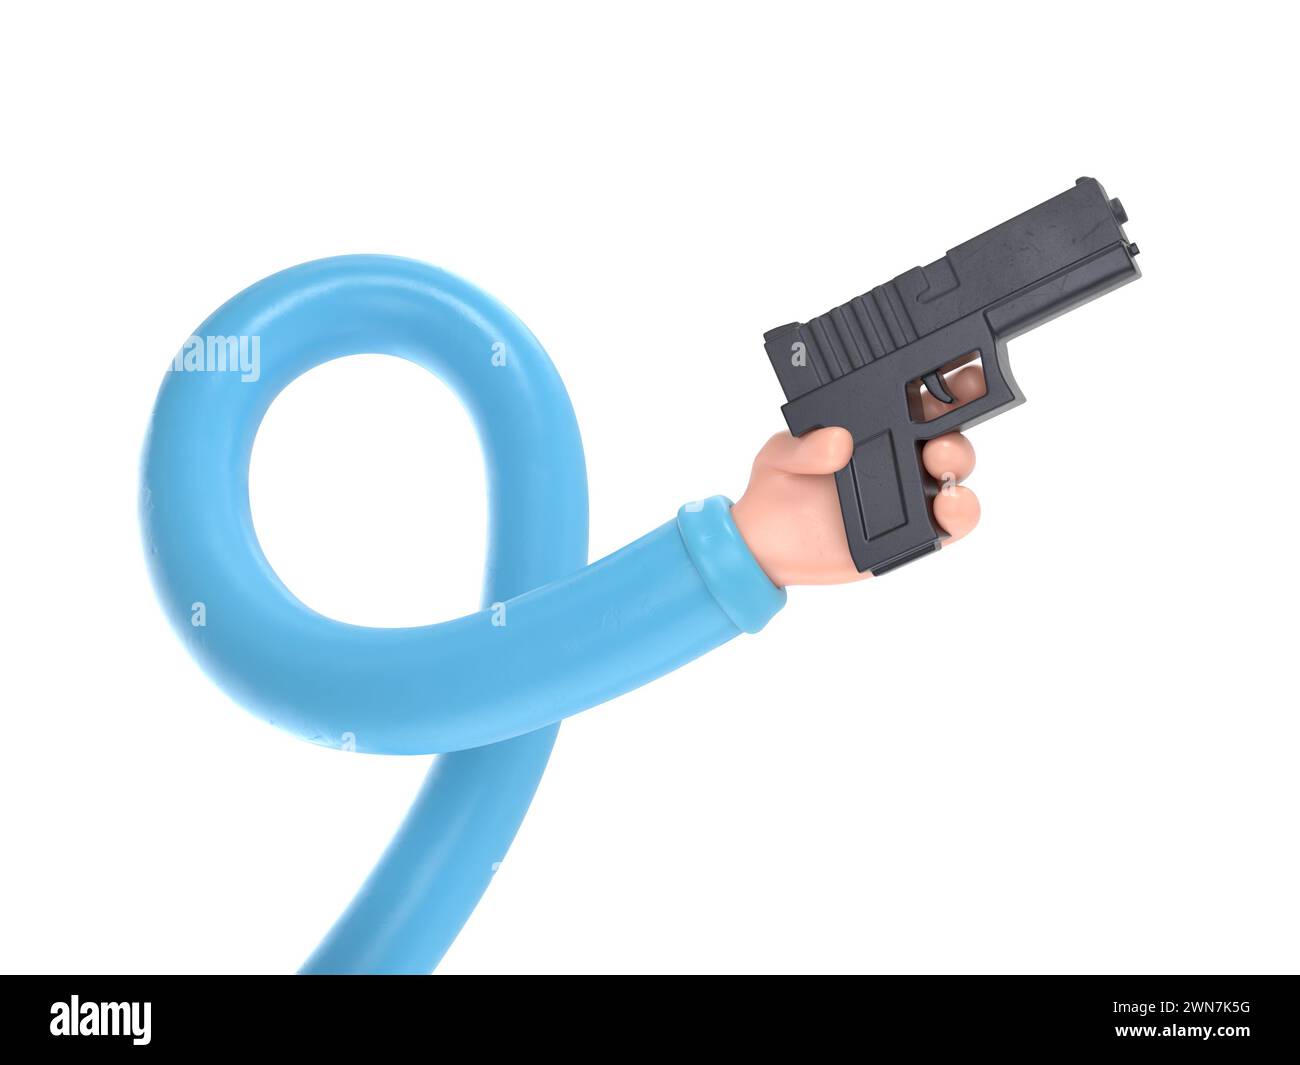 Cartoon Gesture Icon Mockup.Hand drawn cartoon illustration of human hand with gun, weapon.3D rendering on white background.long arms concept. Stock Photo